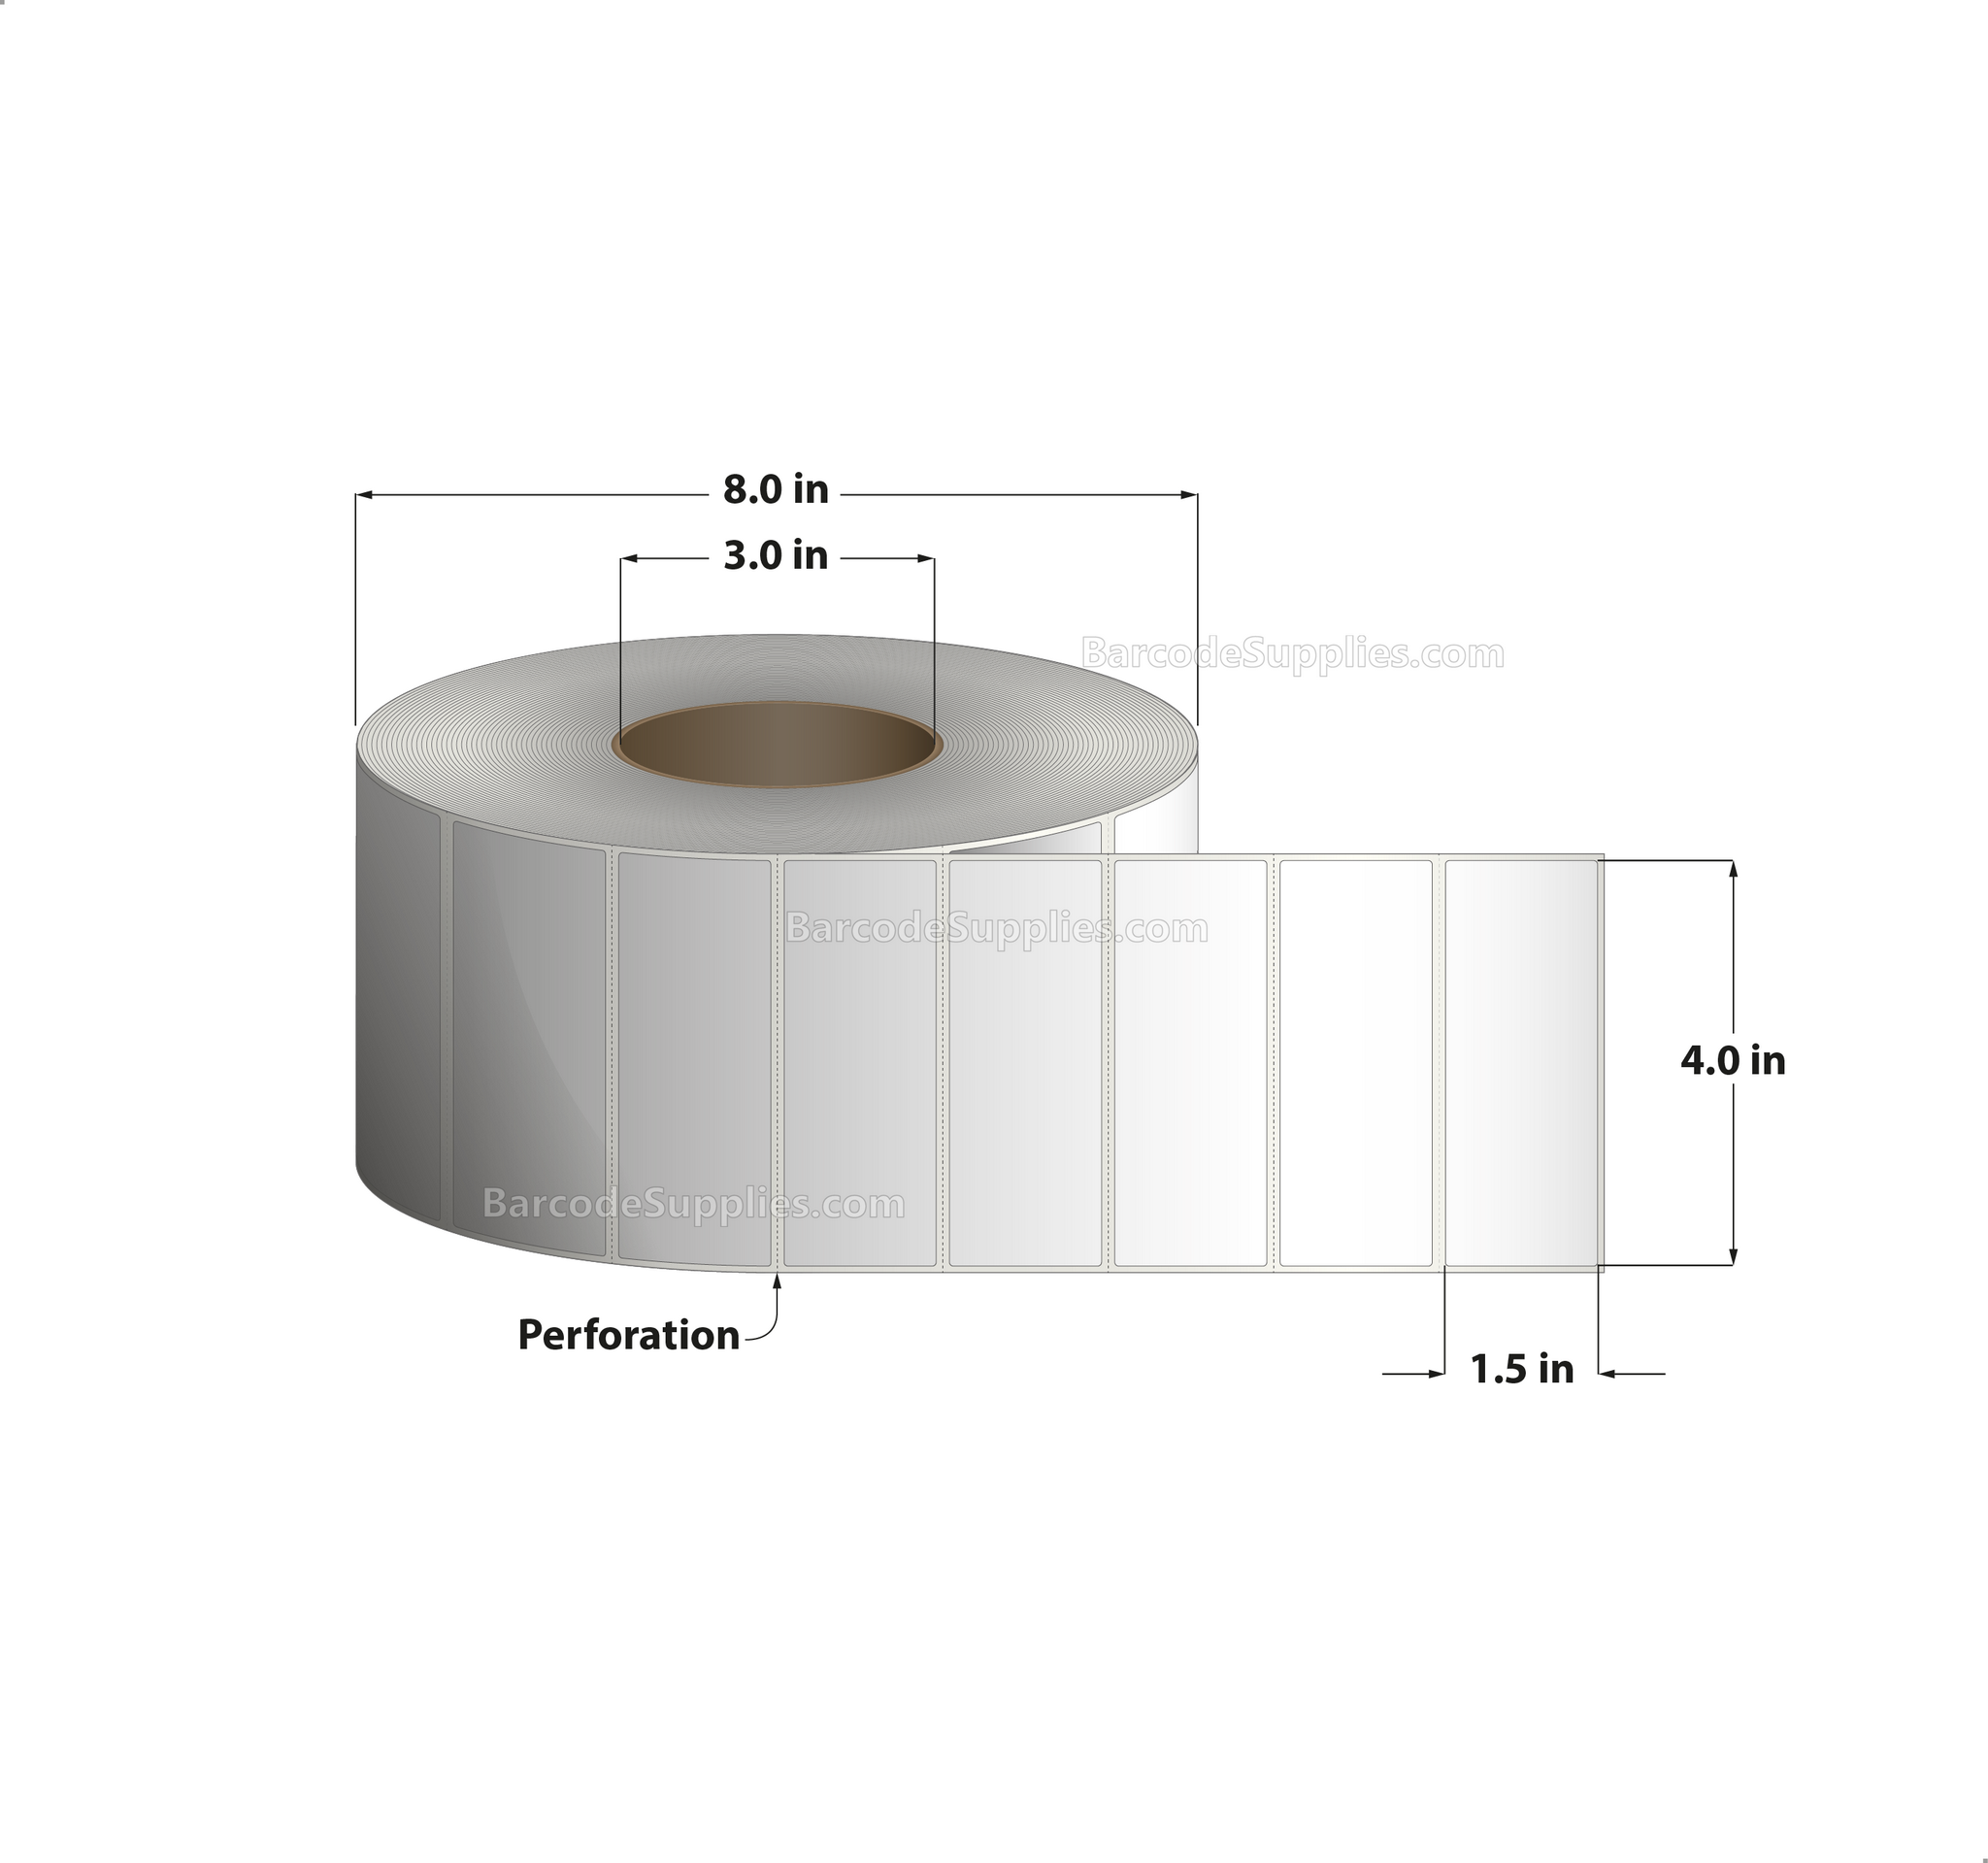 4 x 1.5 Direct Thermal White Labels With Rubber Adhesive - Perforated - 3850 Labels Per Roll - Carton Of 4 Rolls - 15400 Labels Total - MPN: DT400150-3P